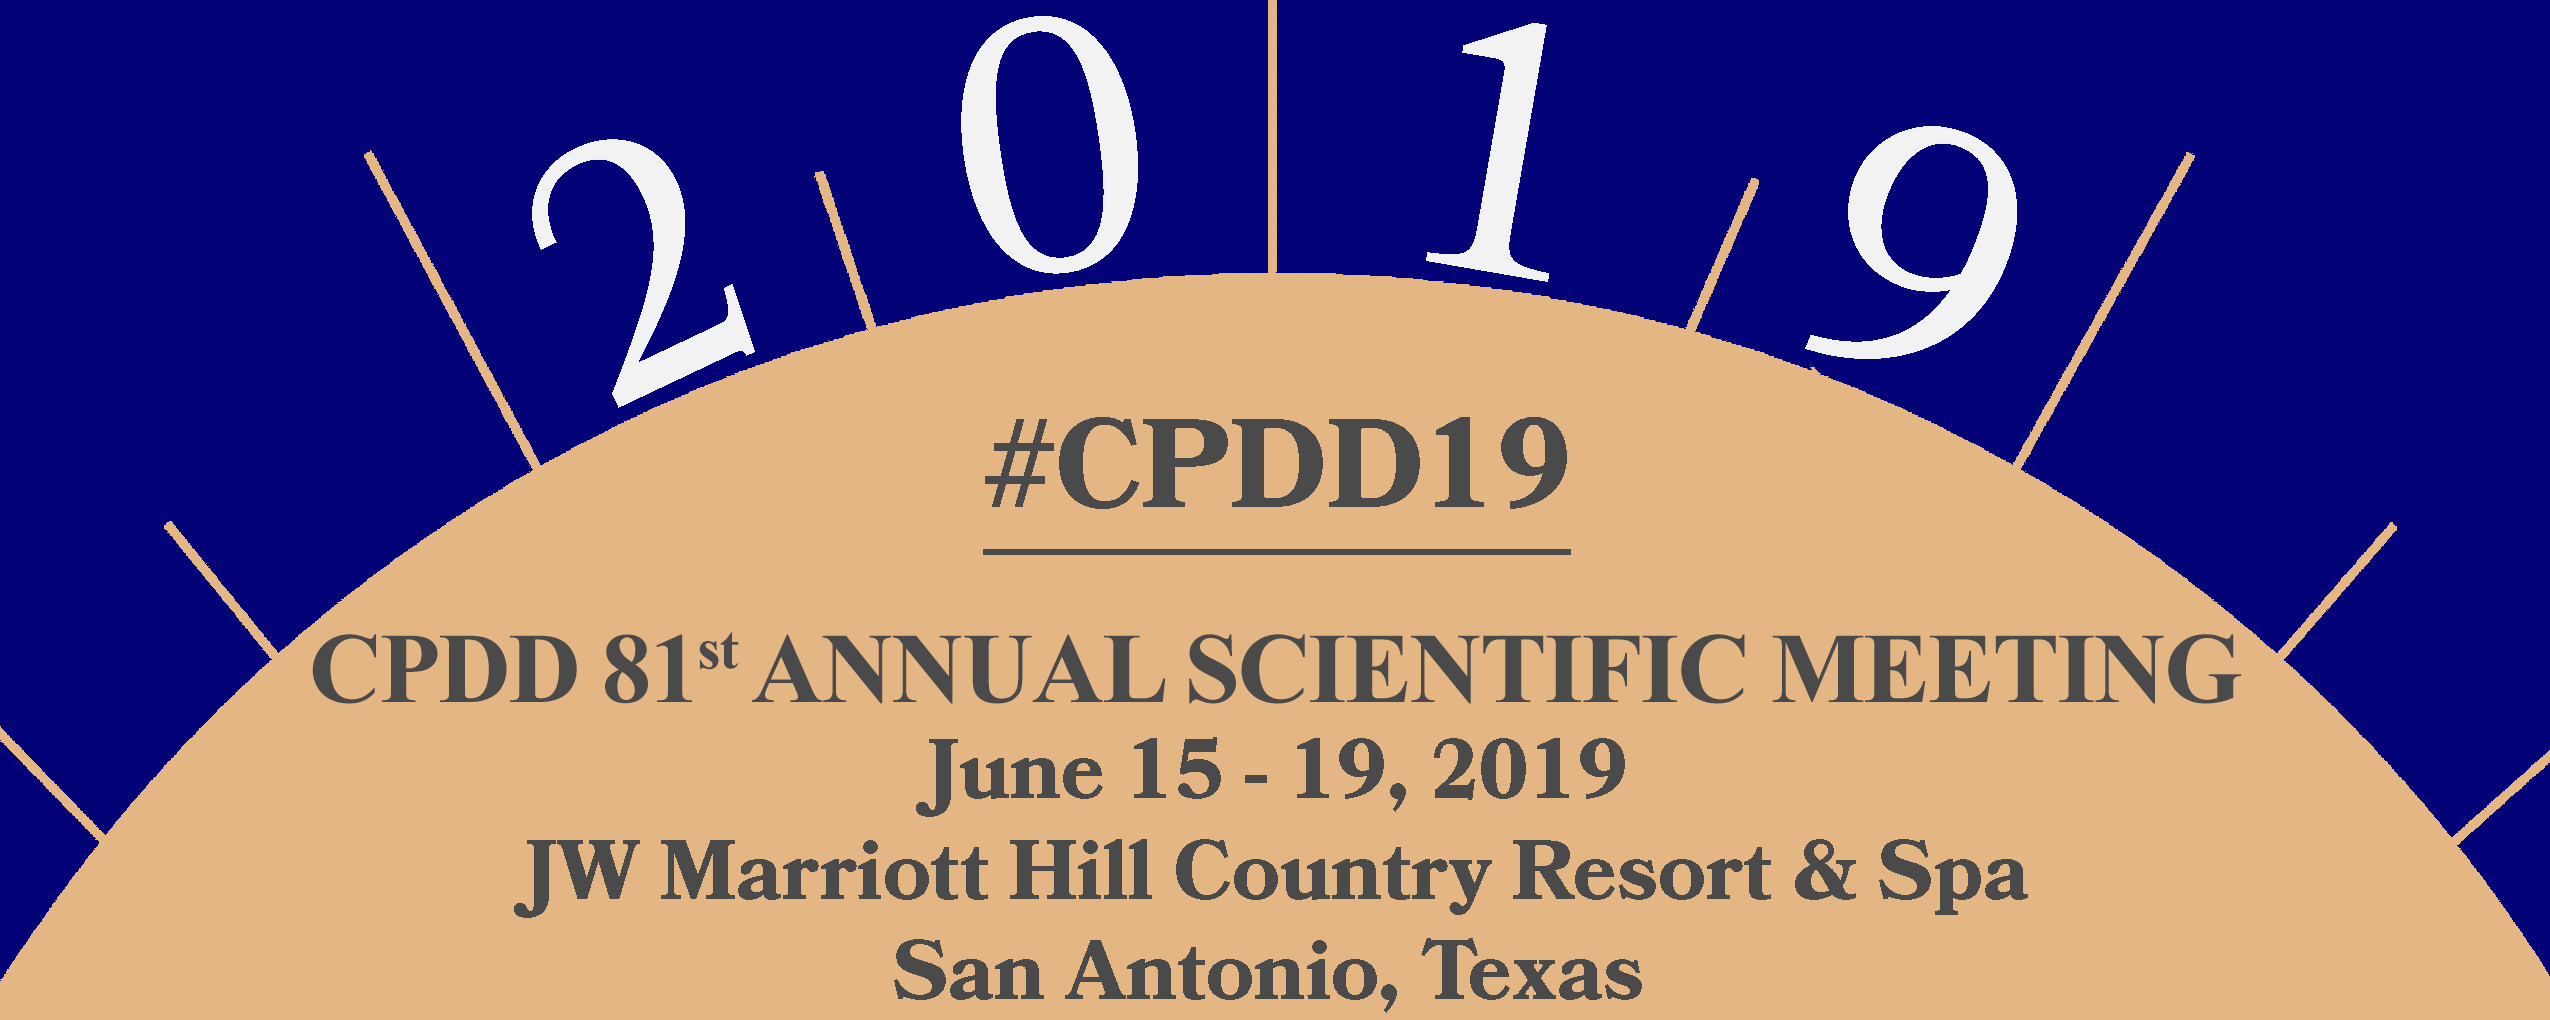 2019 CPDD Grant Writing and Career Development College on